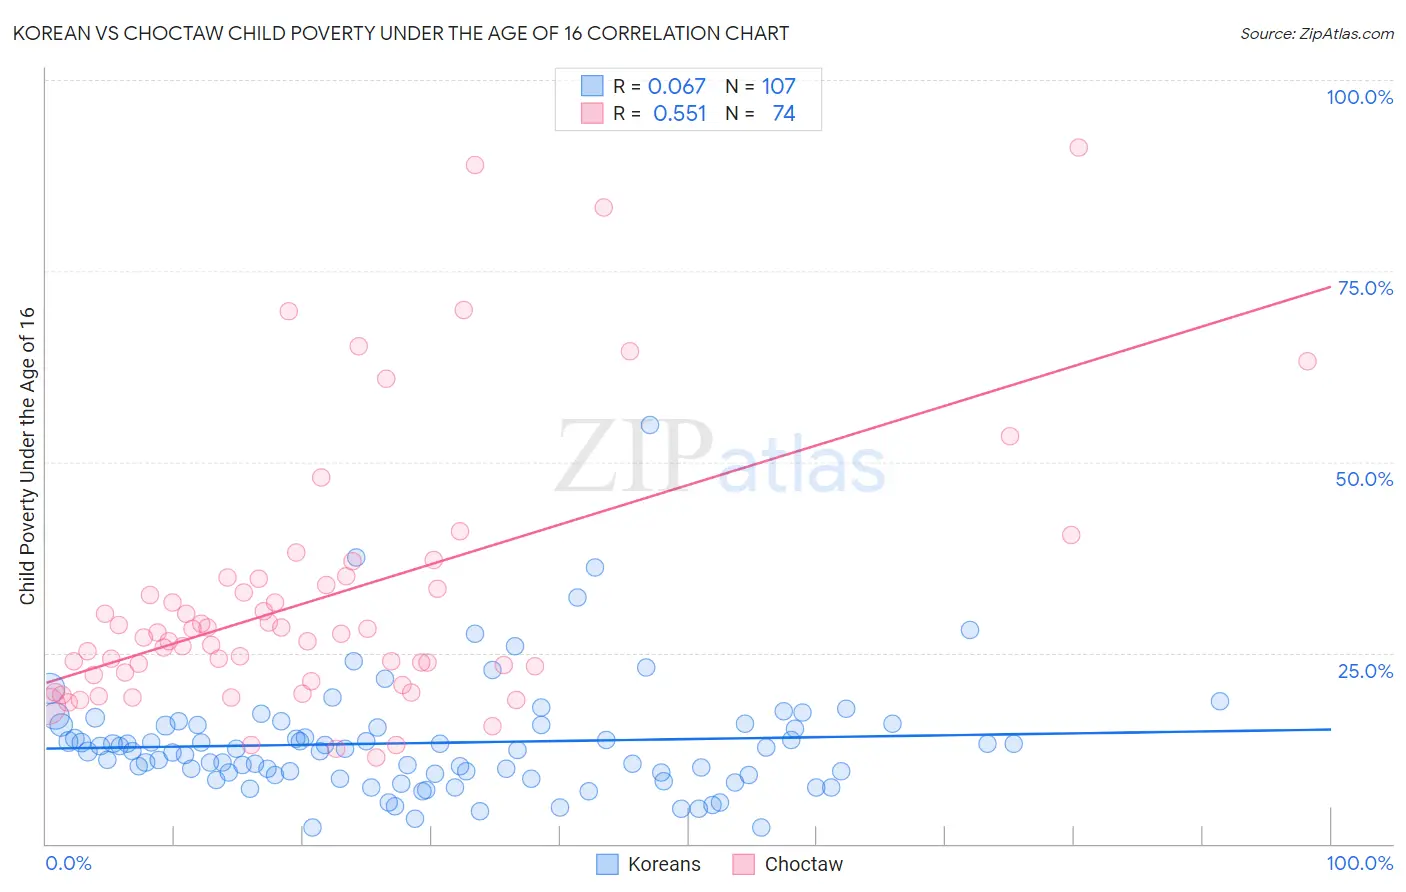 Korean vs Choctaw Child Poverty Under the Age of 16